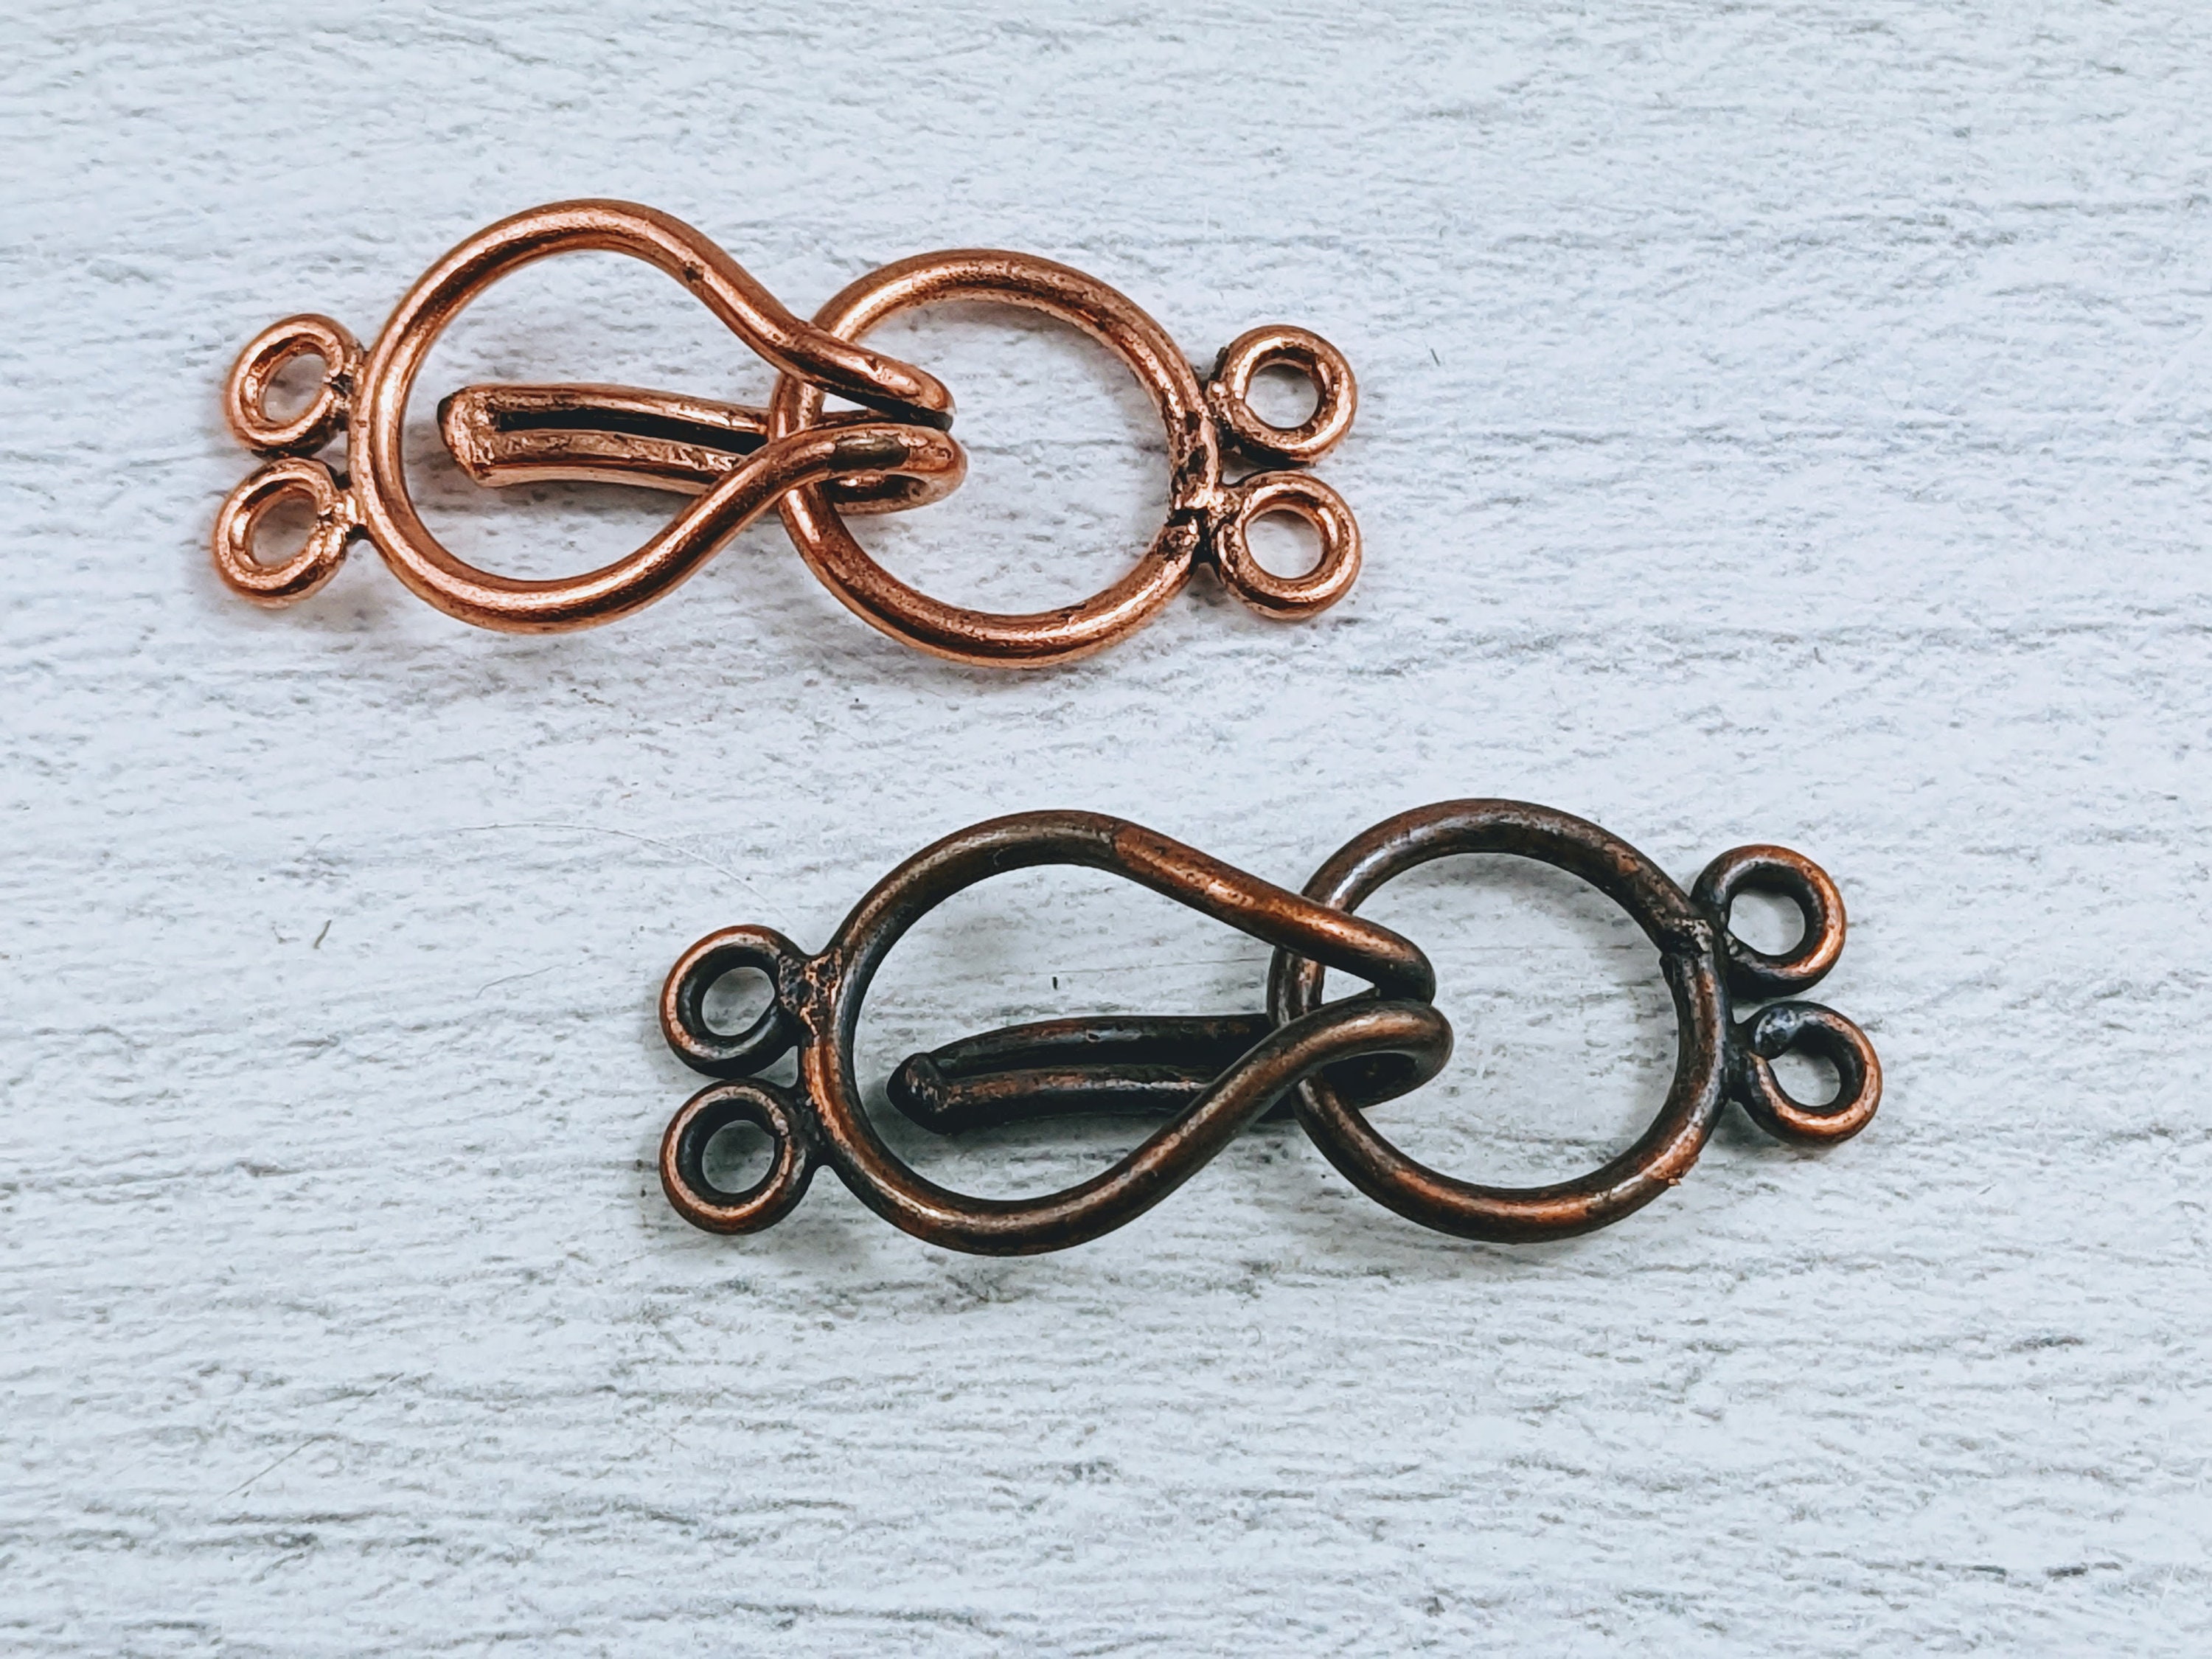 Large Genuine Copper Spiral Hook Clasp, Bright or Patina Finish, Antiqued,  38x14mm -  Ireland